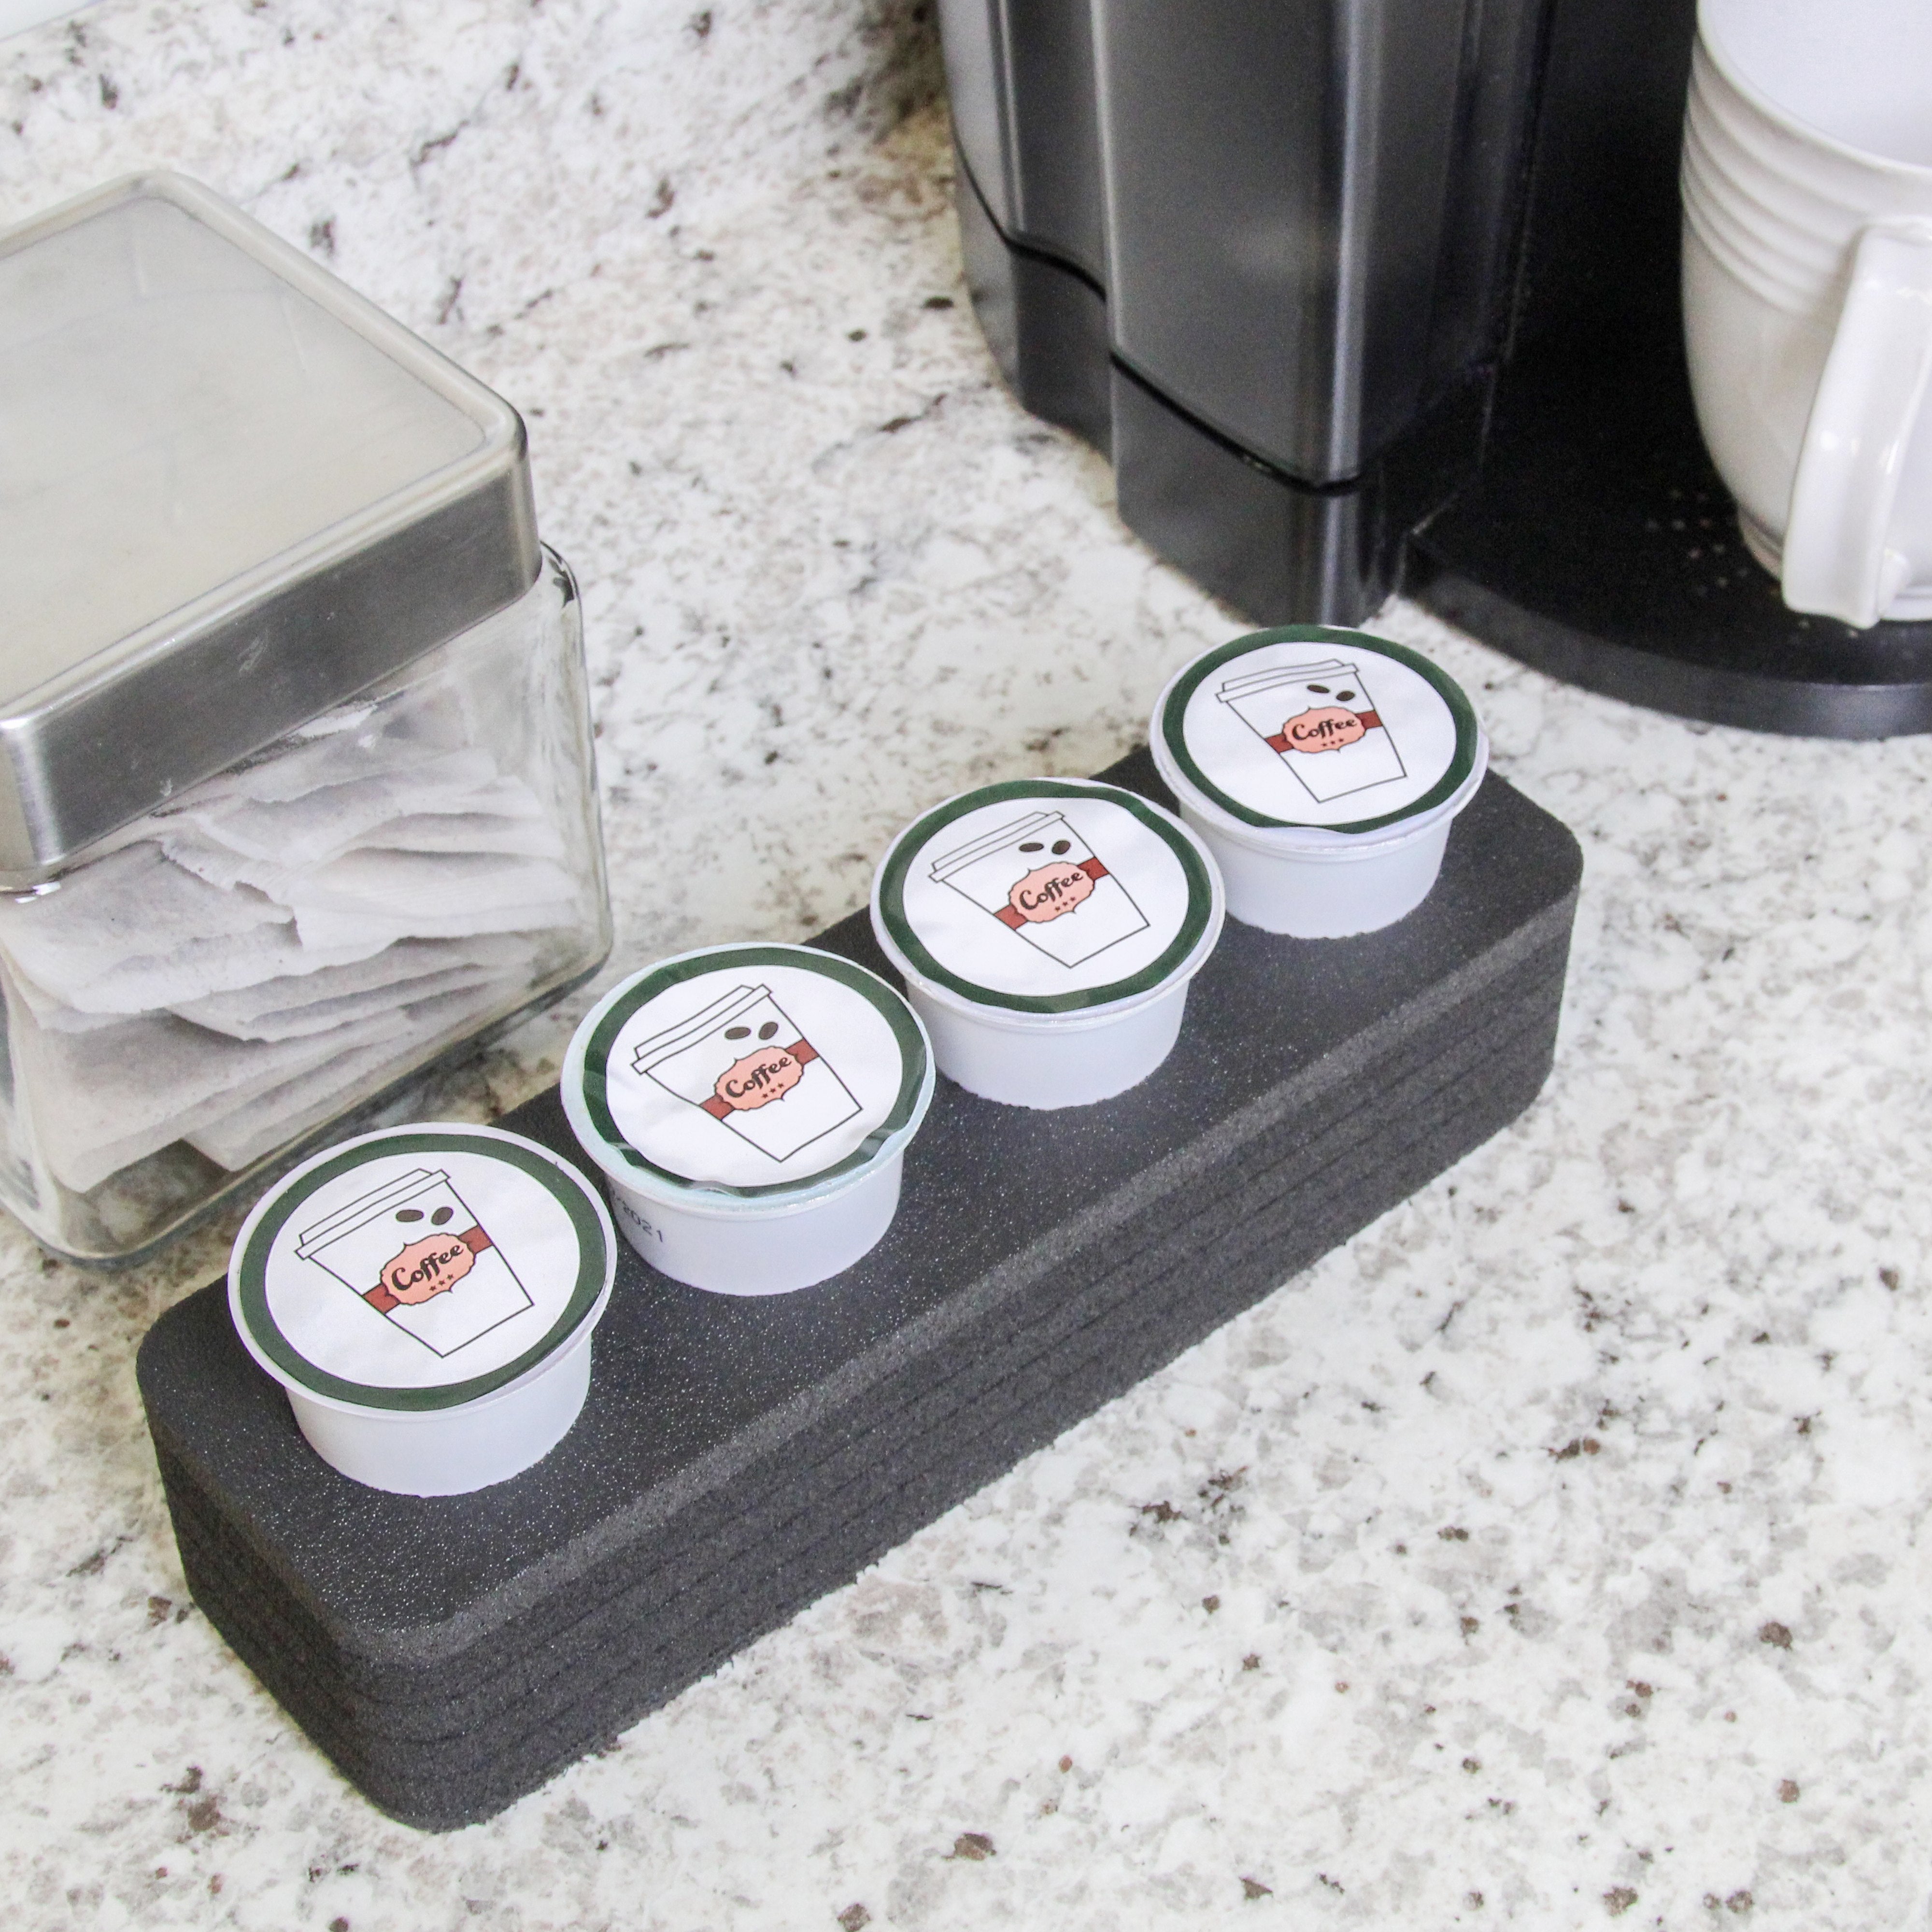 Hotel Hospitality Coffee Pod Storage Organizer Tray Holder Waterproof Washable Bed Breakfast Drawer Insert Holds 4 Pods Compatible Keurig K-Cup